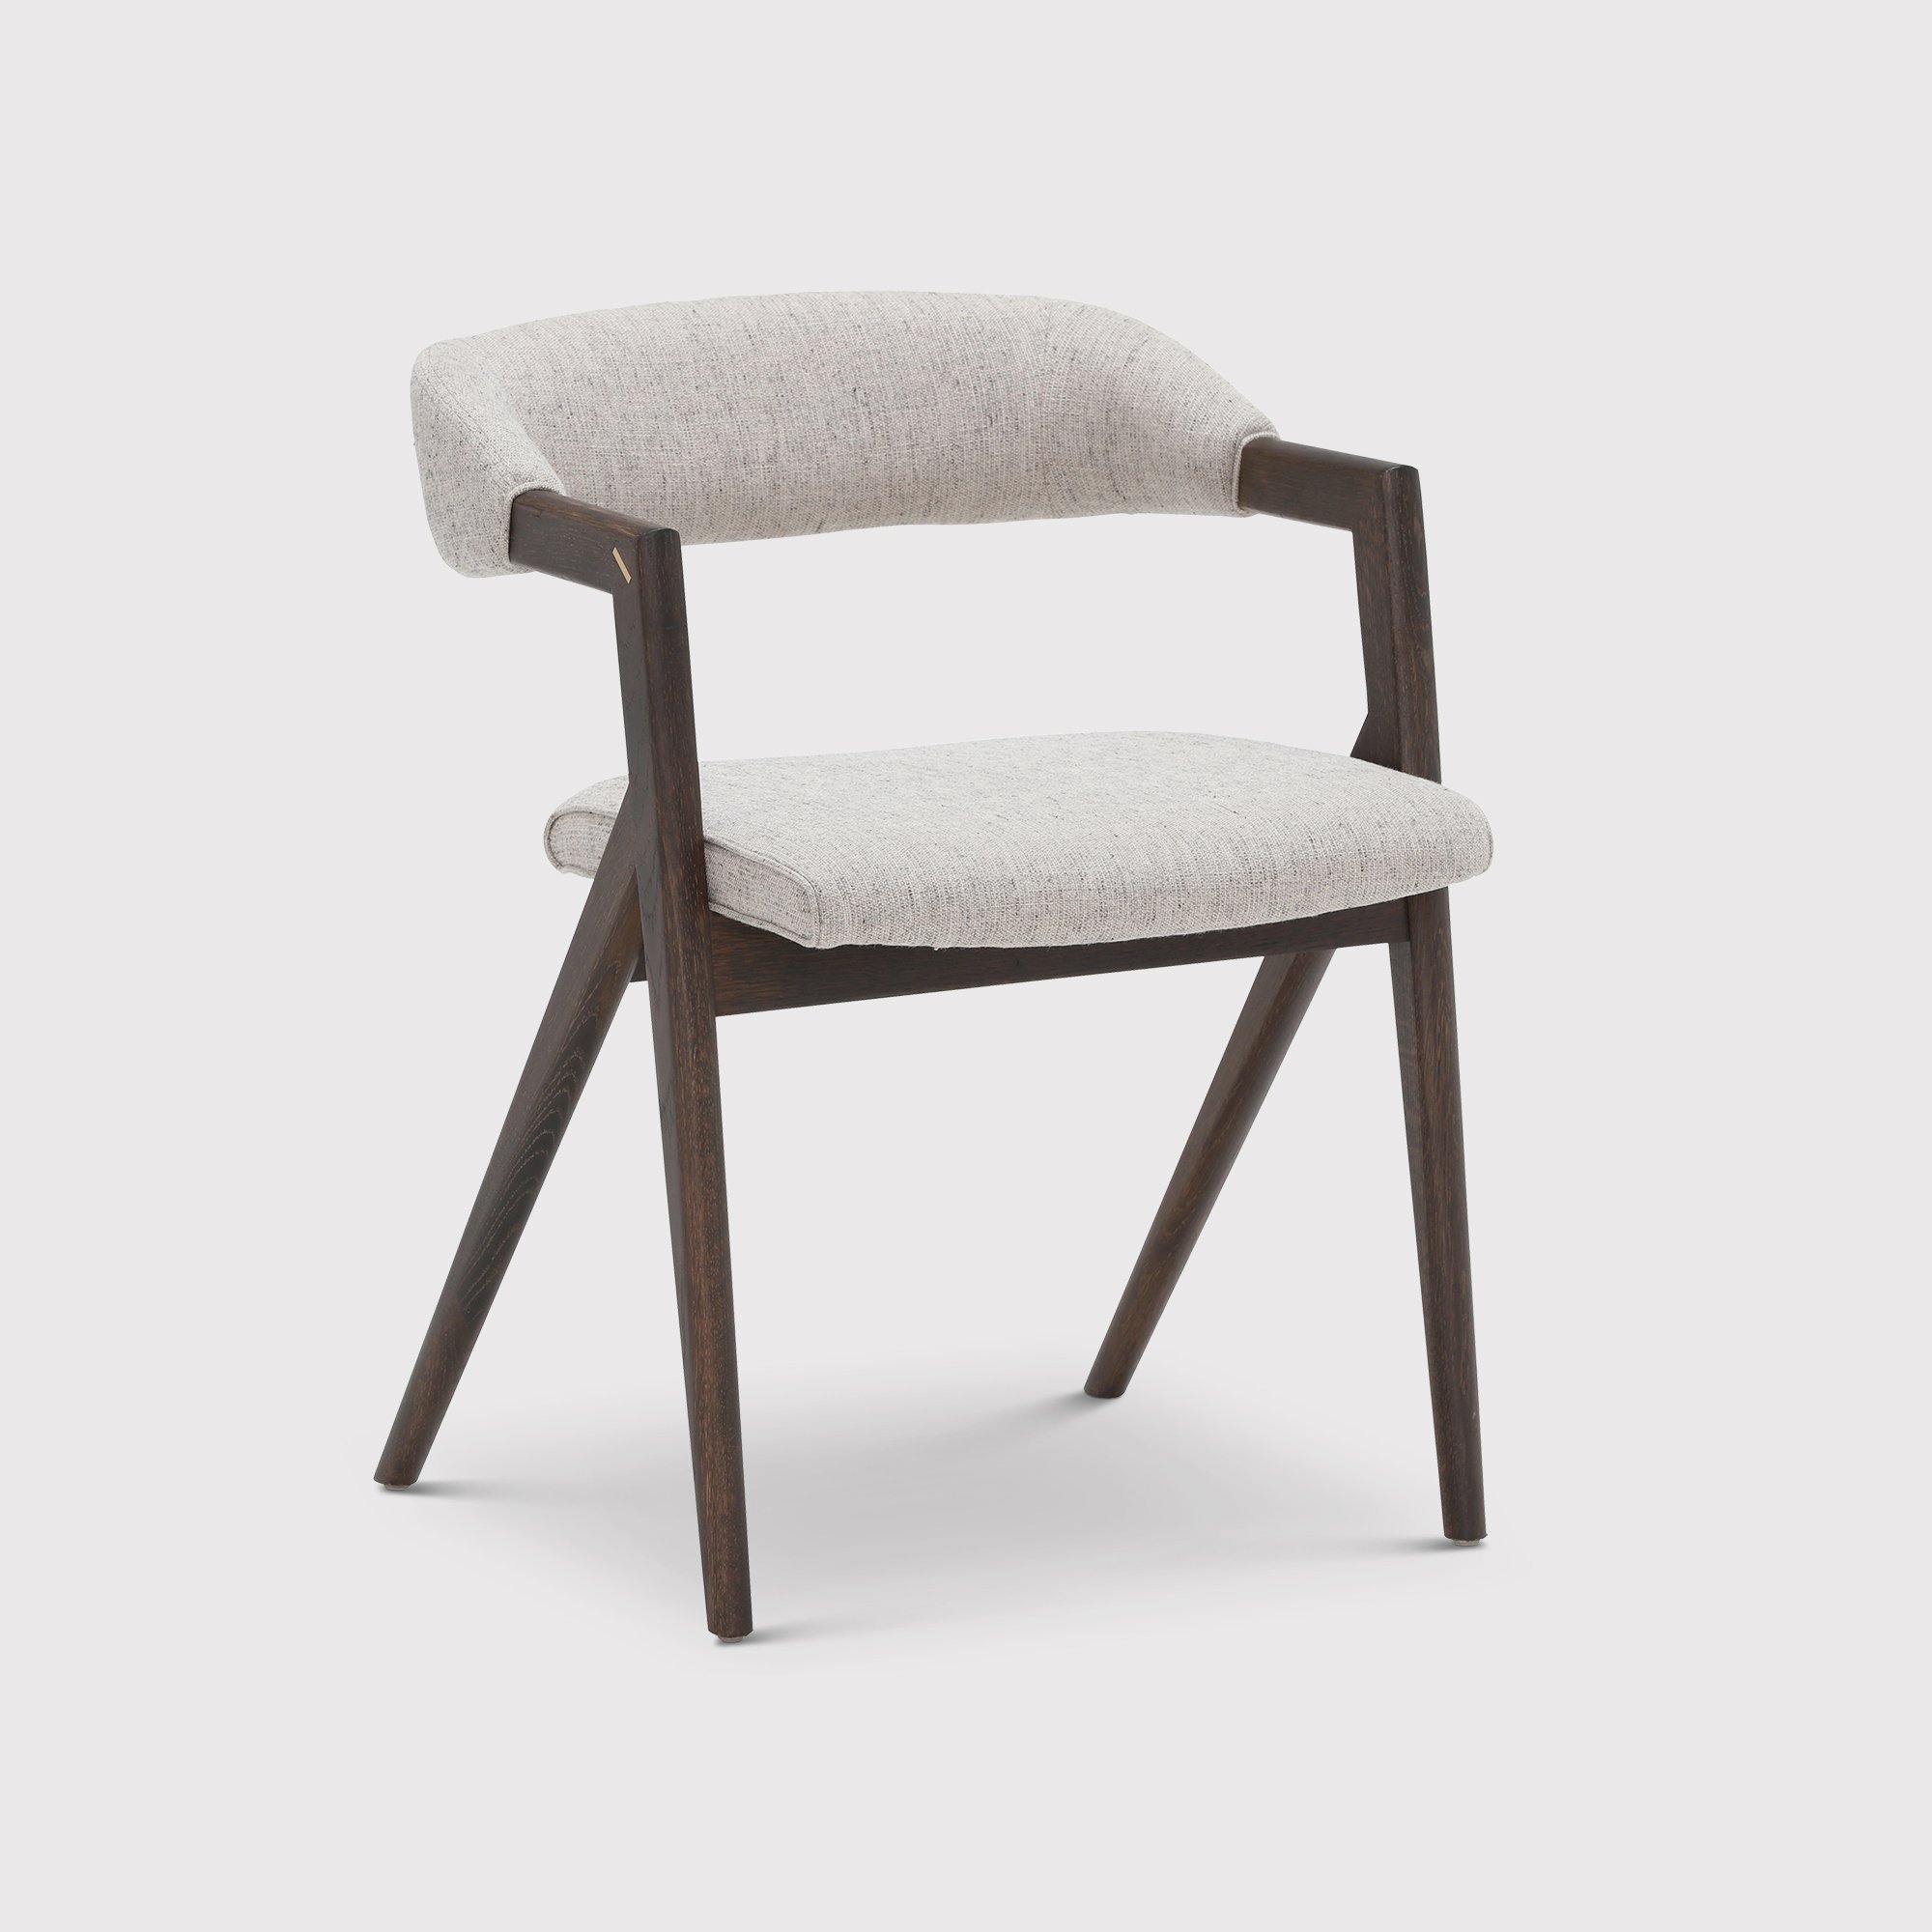 Zora Dining Dining Chair With Arms, White Wood | Barker & Stonehouse